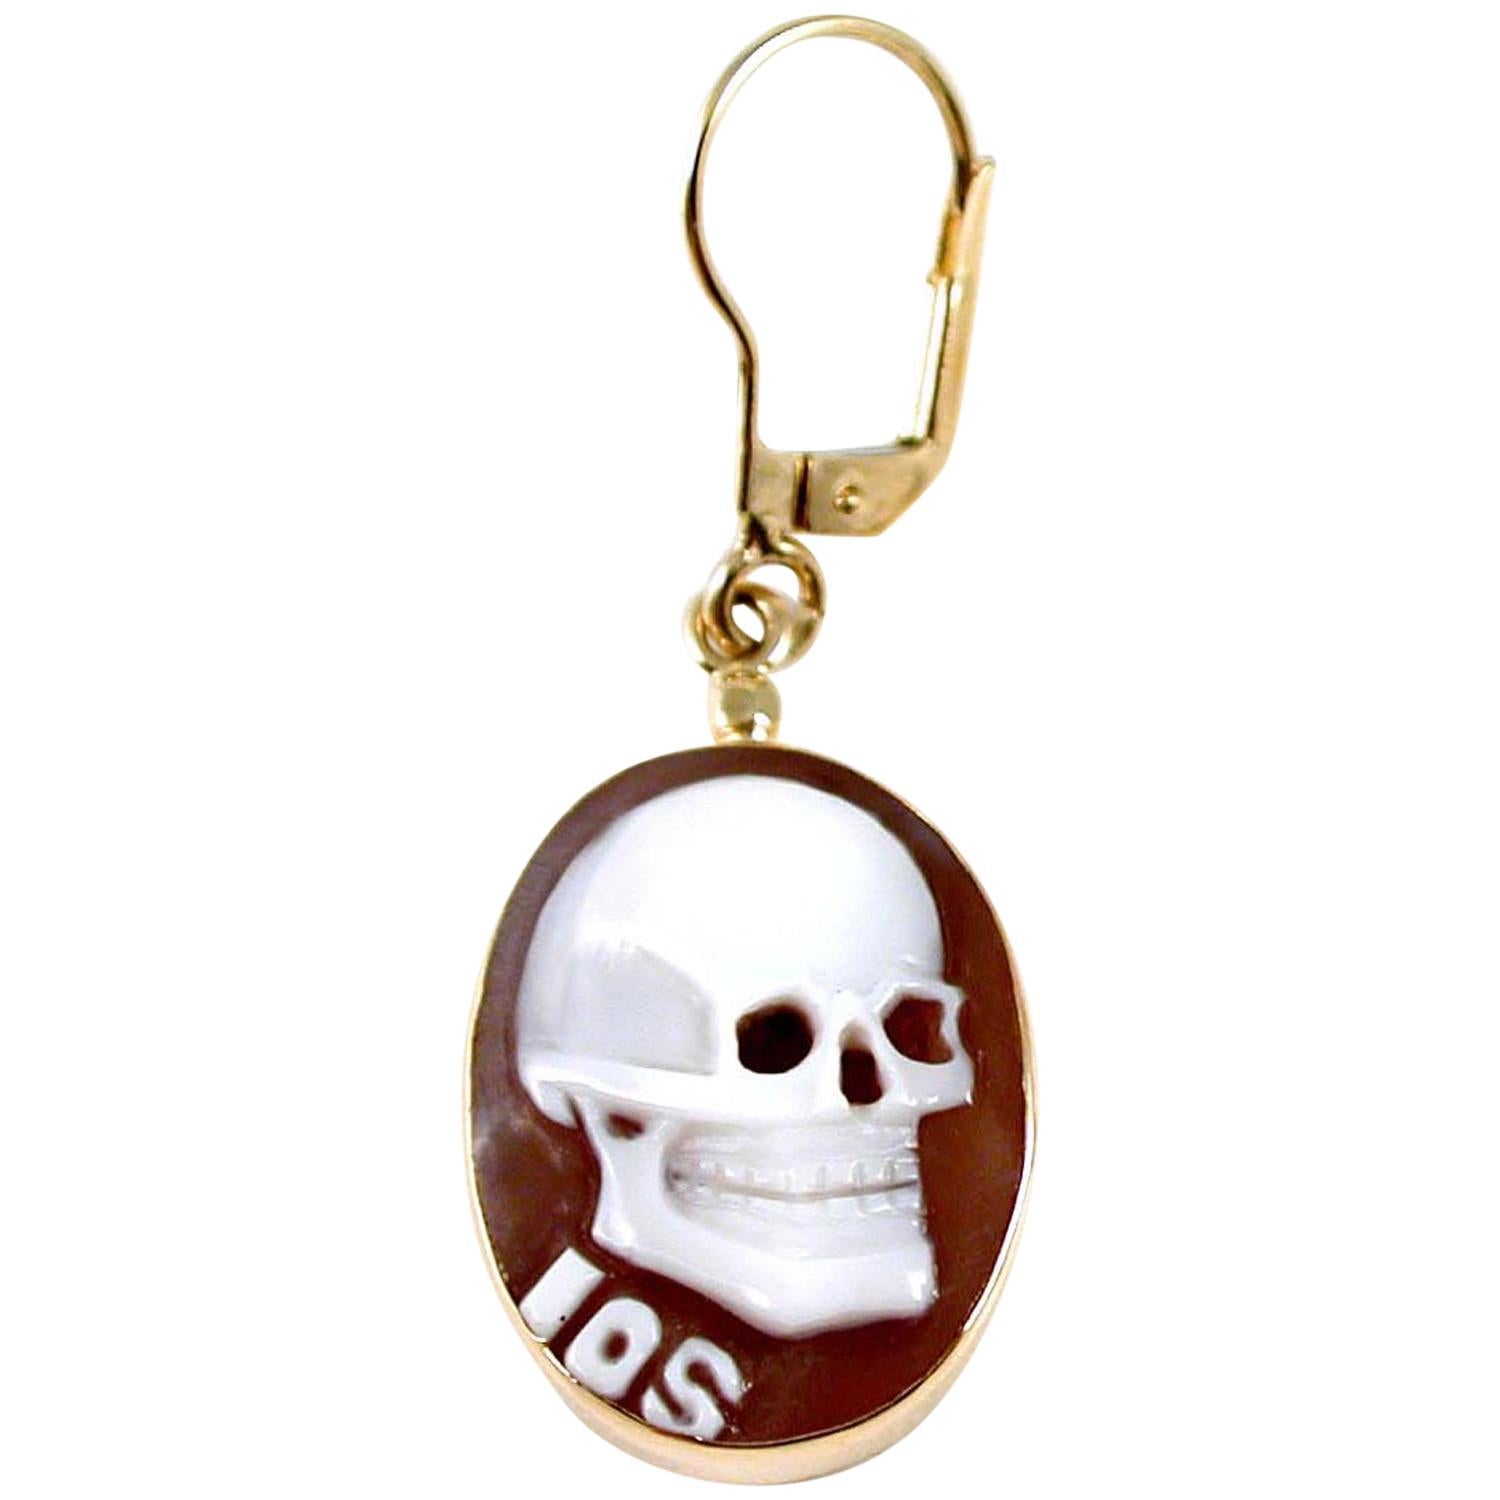 Skull Cameo Dangling Oval Earring in 18 Carat Gold from Iosselliani For Sale